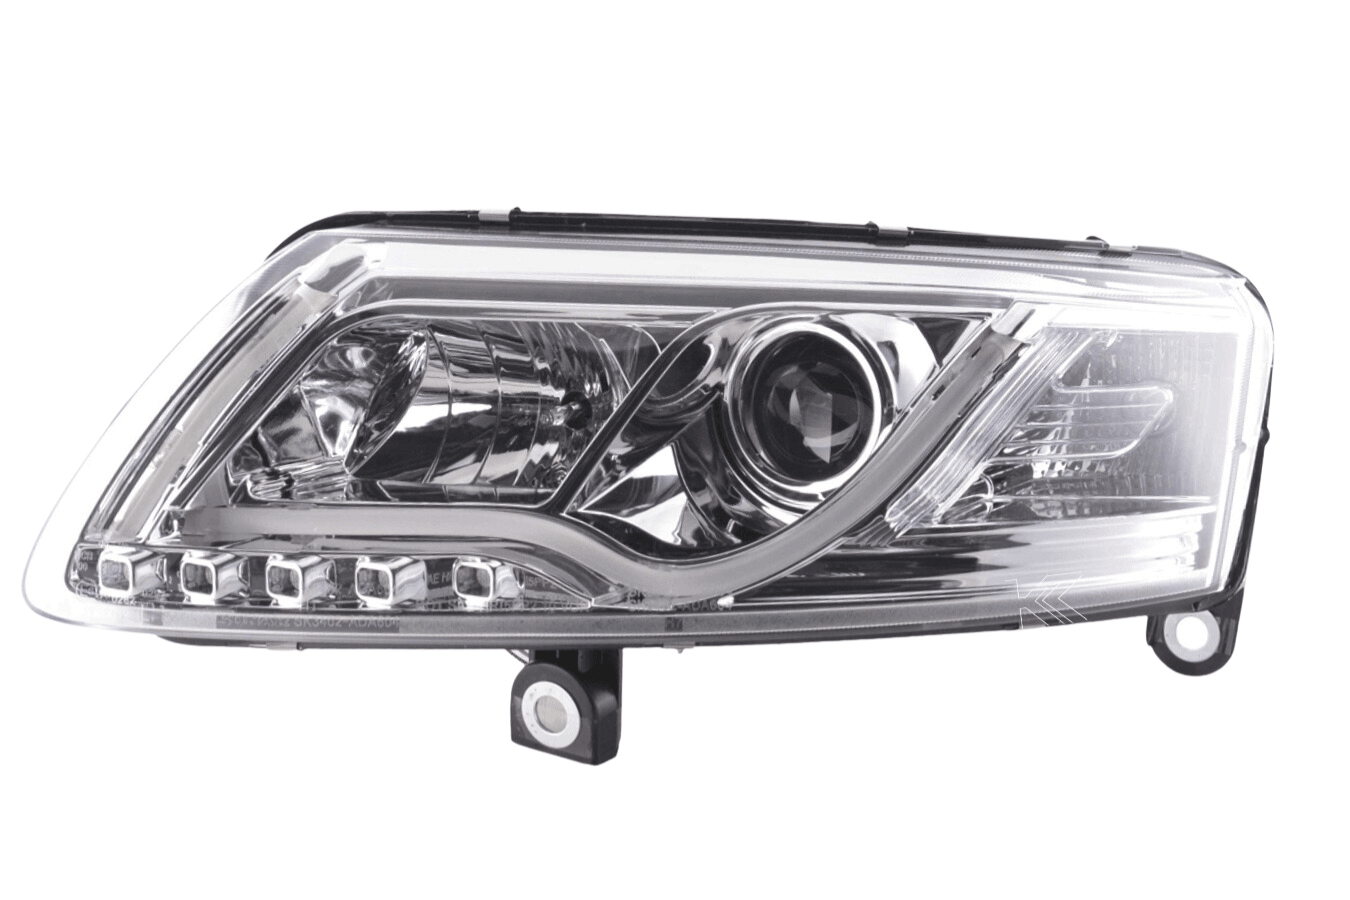 Audi A6 (C6 4F) Chrome LED Headlights with Daytime Running Lights (200